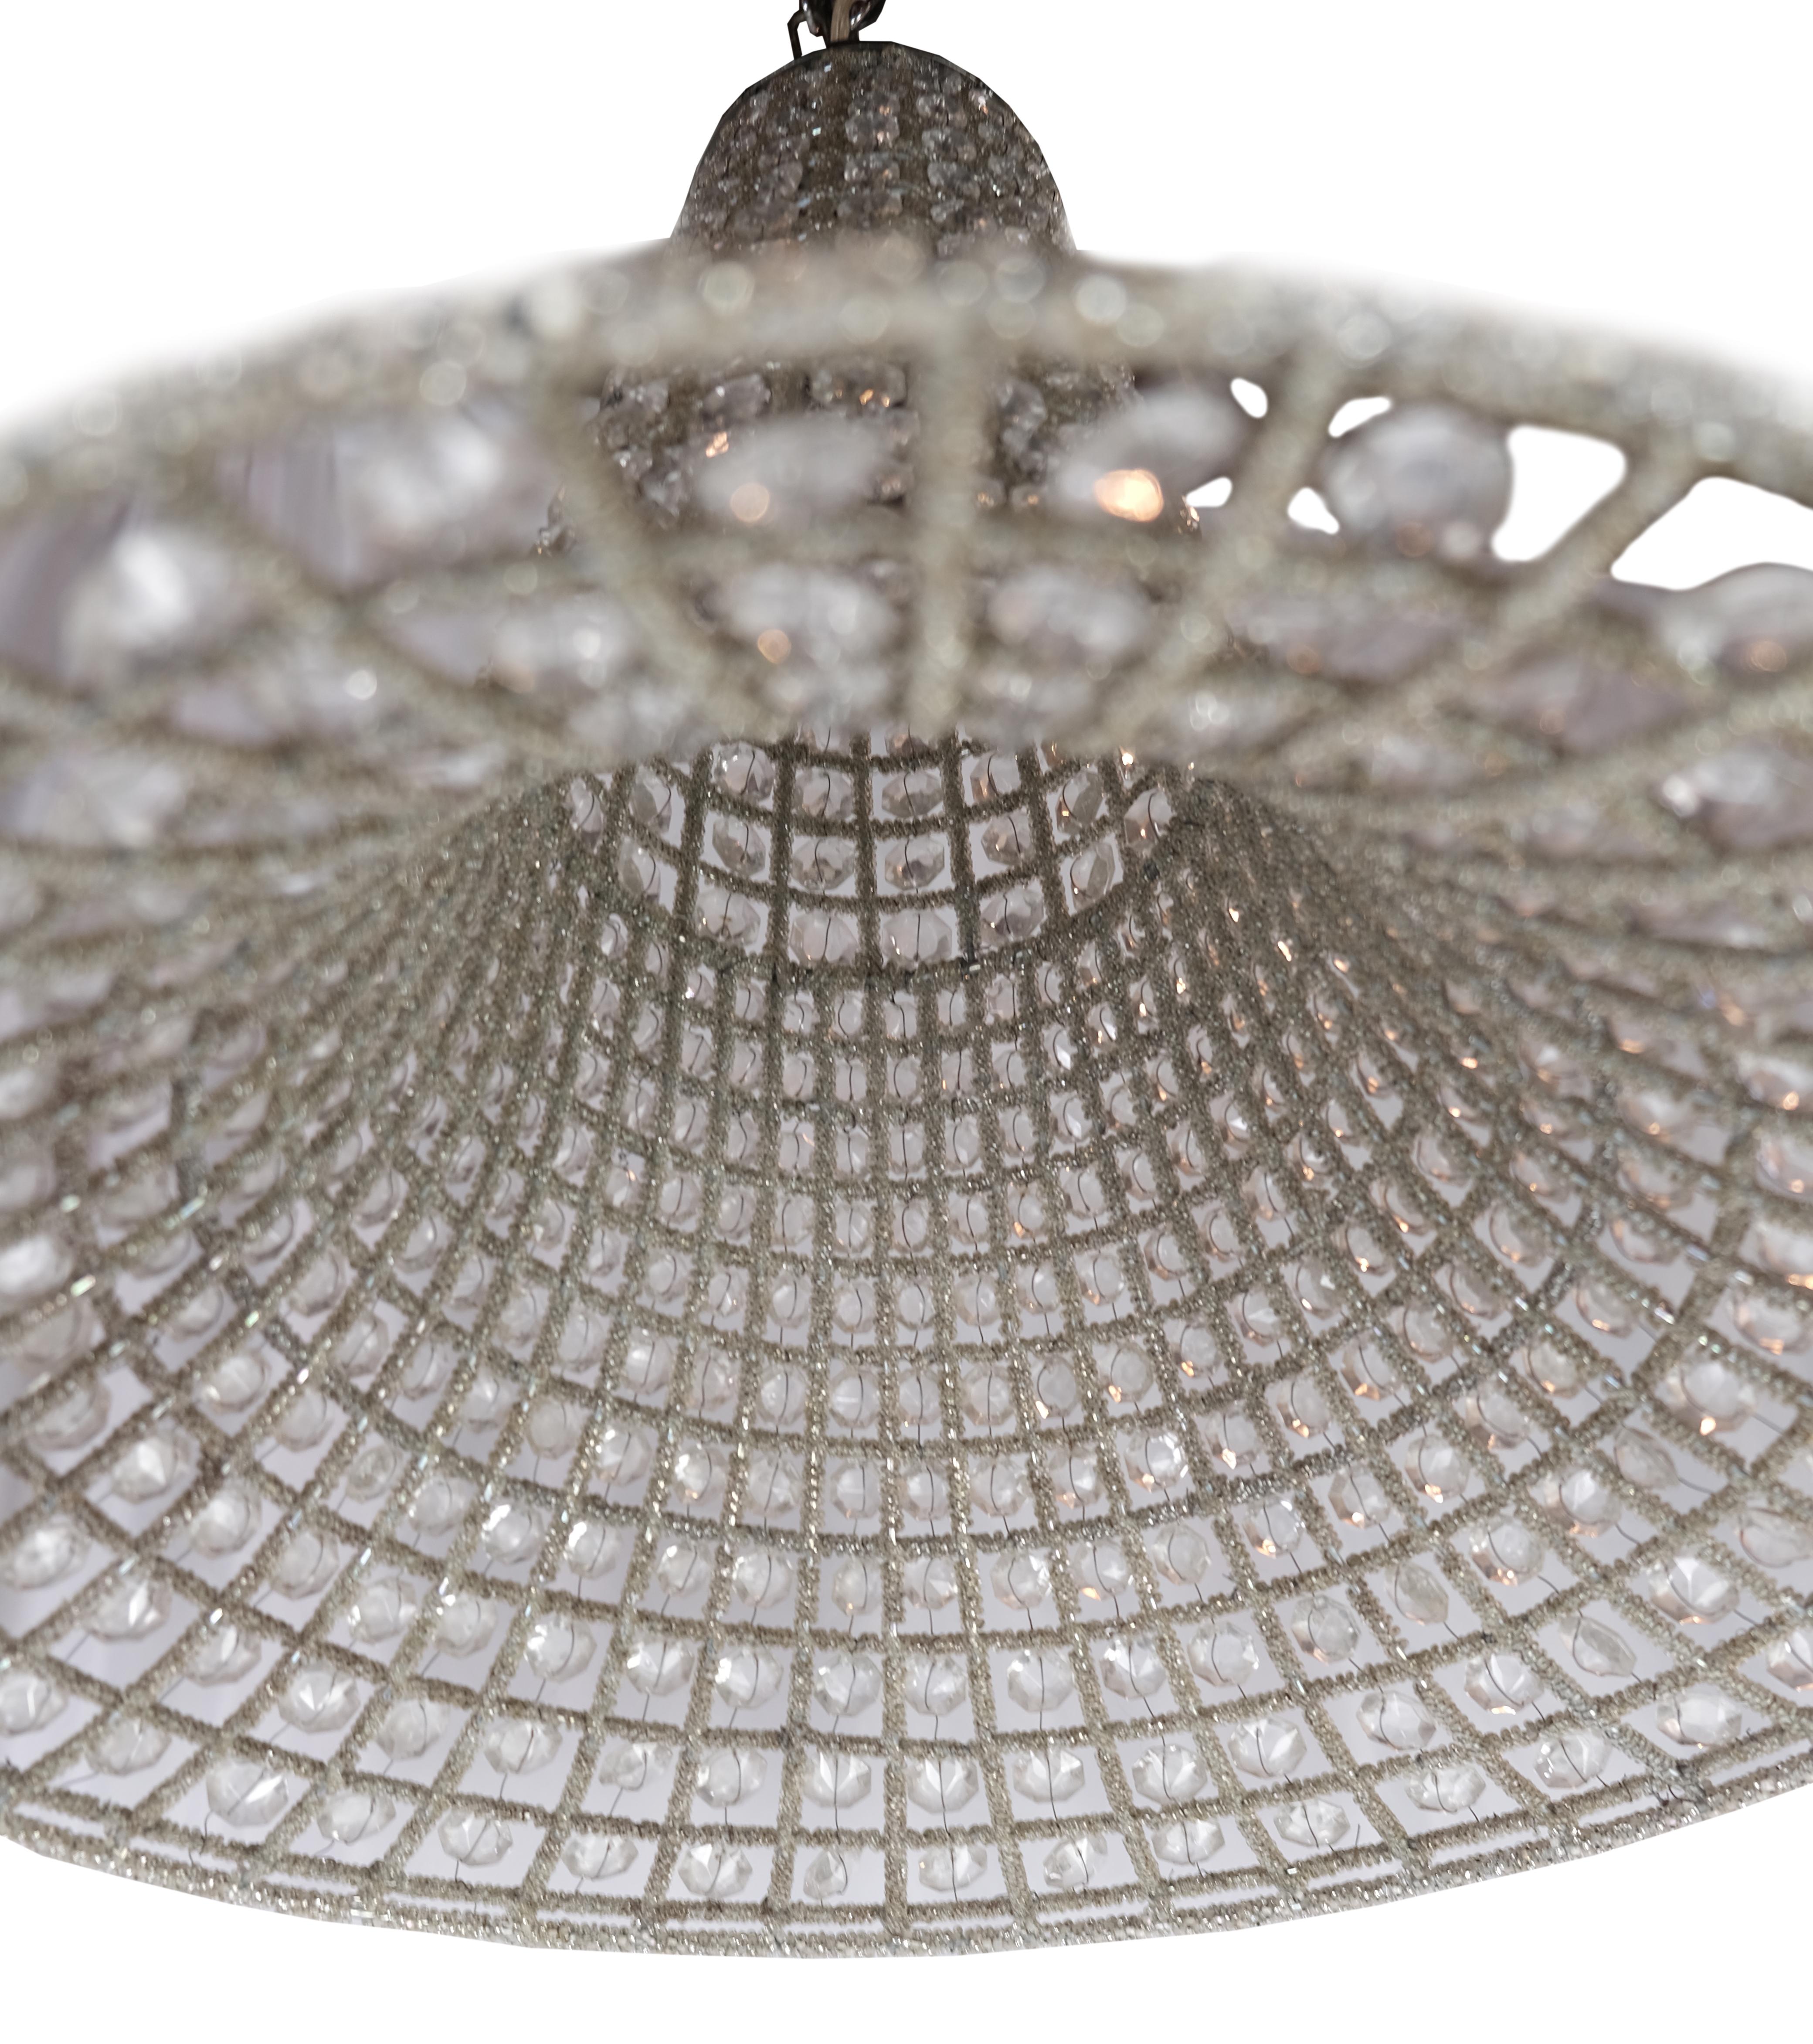 French bell shaped beaded glass and wire pendant chandeliers. We found these chic pendant lights in Paris. They are a great mix of Hollywood glamour and mid century modern streamline. Each light has a single standard socket. 
Priced individually.